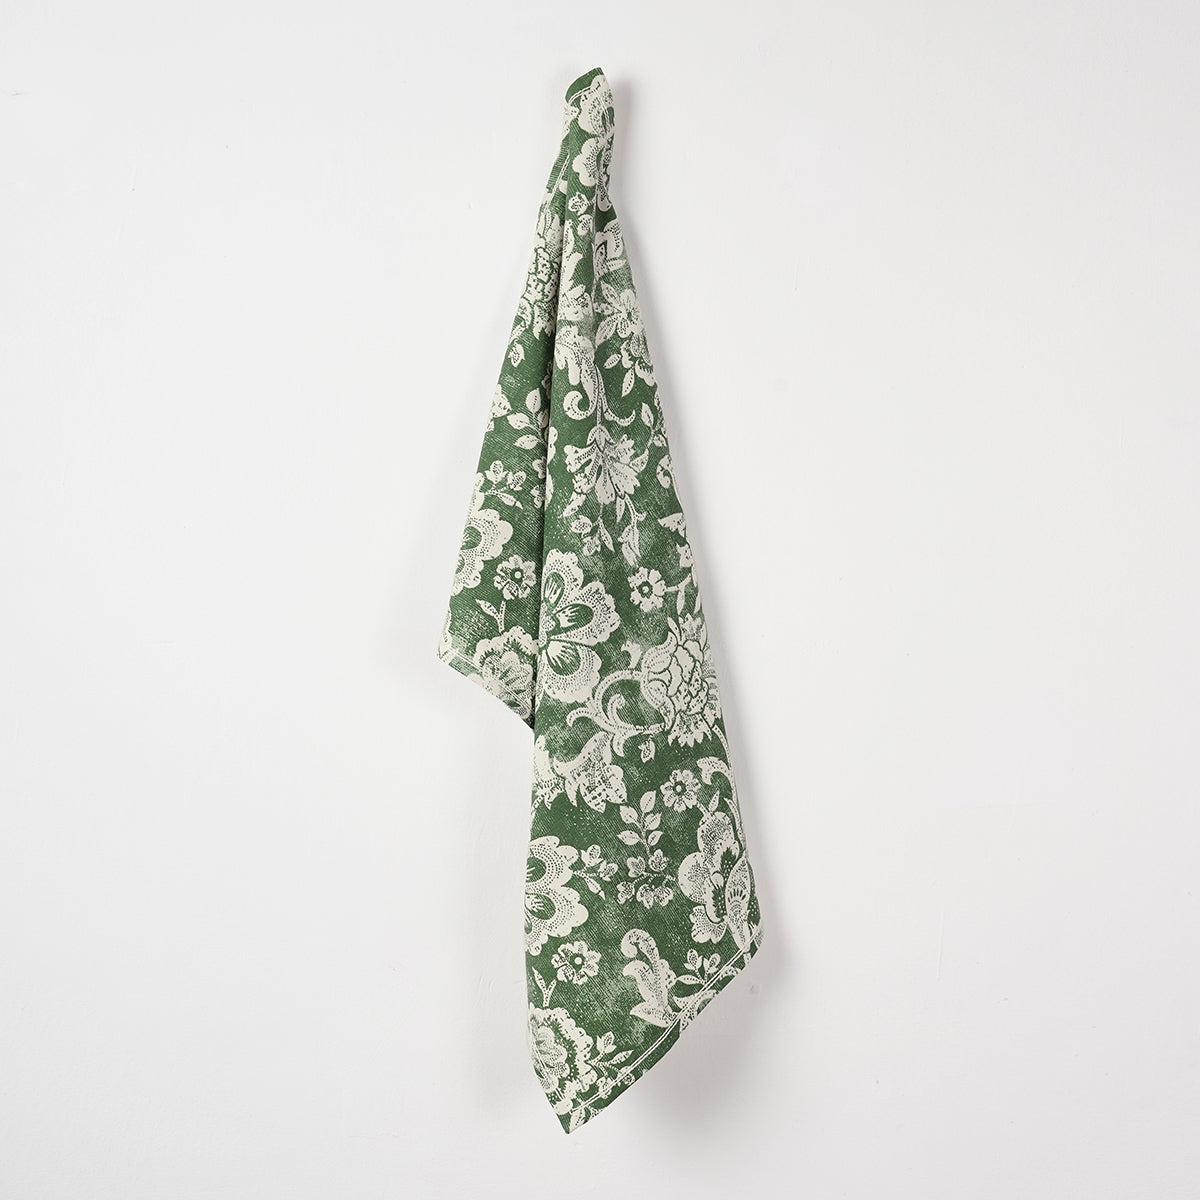 DOMINOTERIE Green Printed Kitchen Towel, bold floral pattern, 100% cotton, size 20"X28"